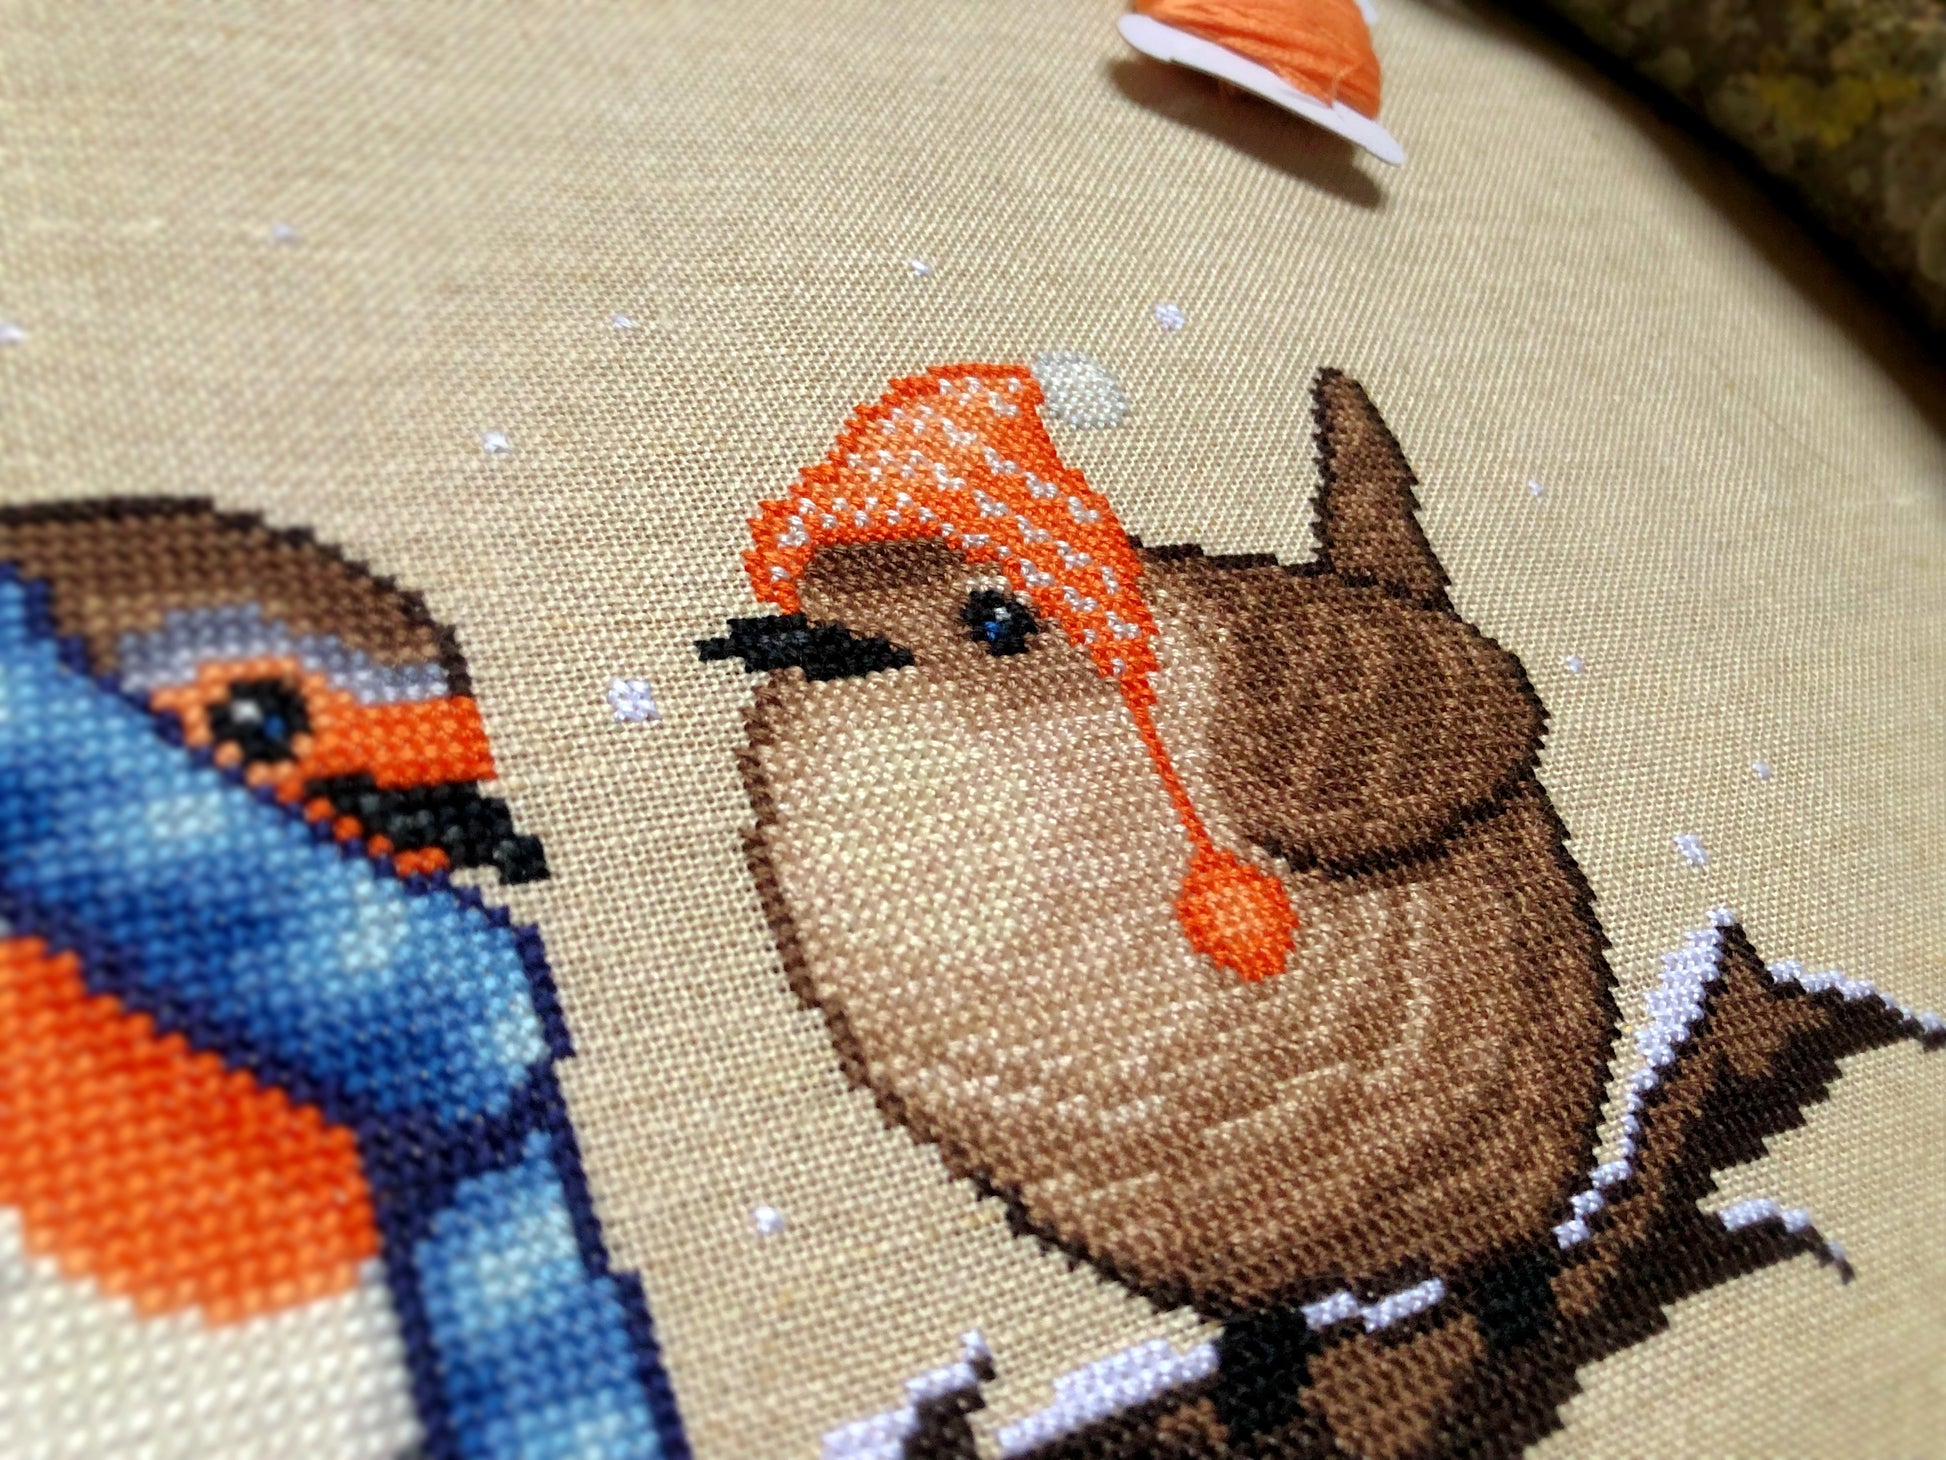 Closeup of Winter Birds cross stitch pattern. Image is zoomed in on the wren. He is very cute and round. The wren is wearing an orange, striped hat with pompoms, and looks very warm. The colors of his feathers are brown and white.